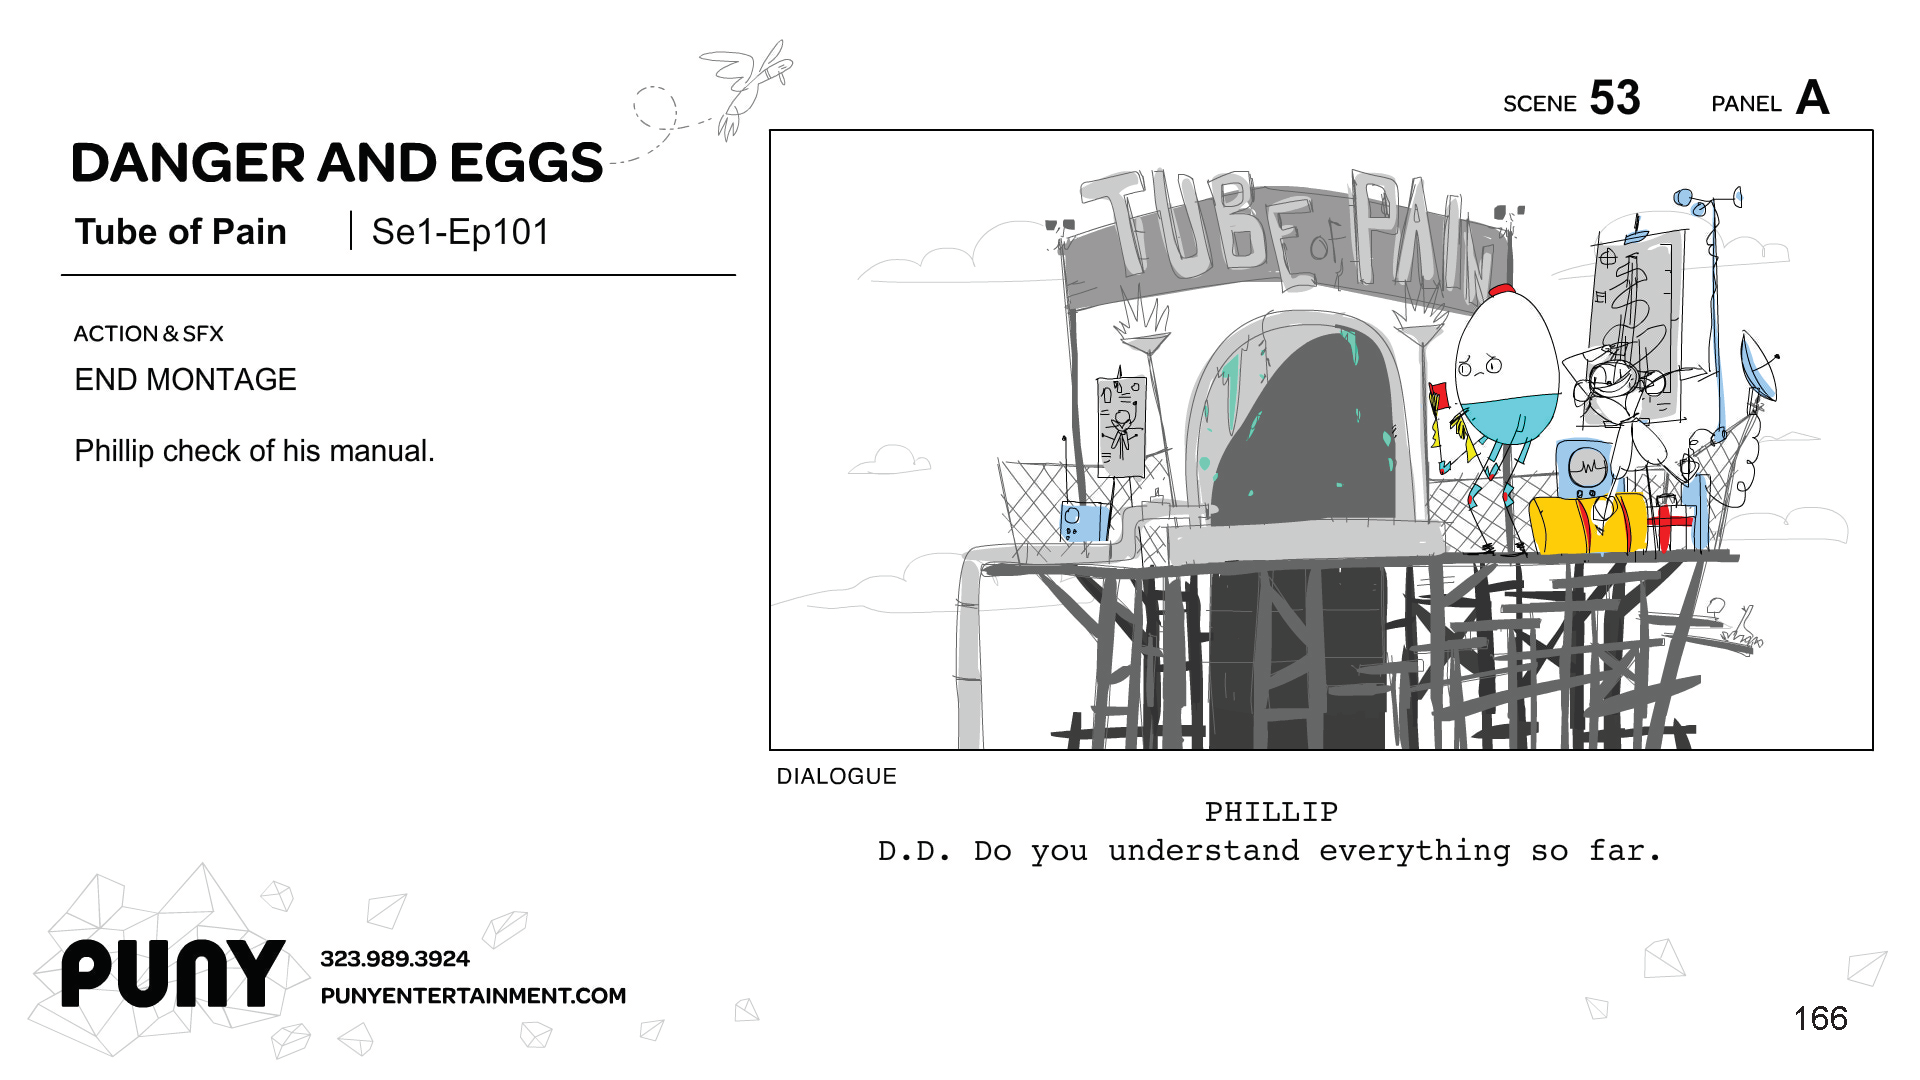 MikeOwens_STORYBOARDS_DangerAndEggs_Page_166.png